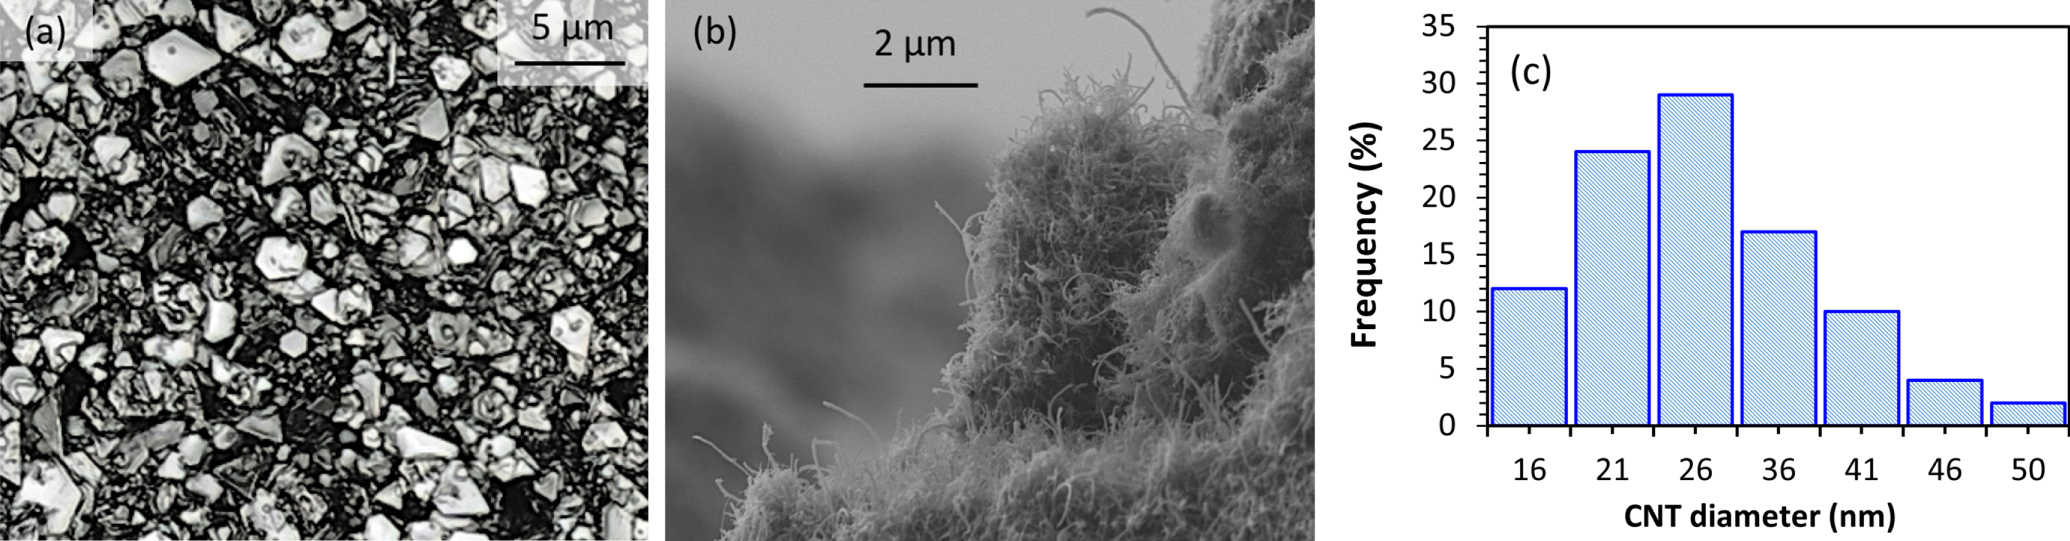 Optical close-up of an Ag imprint (a), SEM close-up of a CNT imprint (b), and histogram of the outer diameter of the CNT powder used as filler in the CNT inks (c).